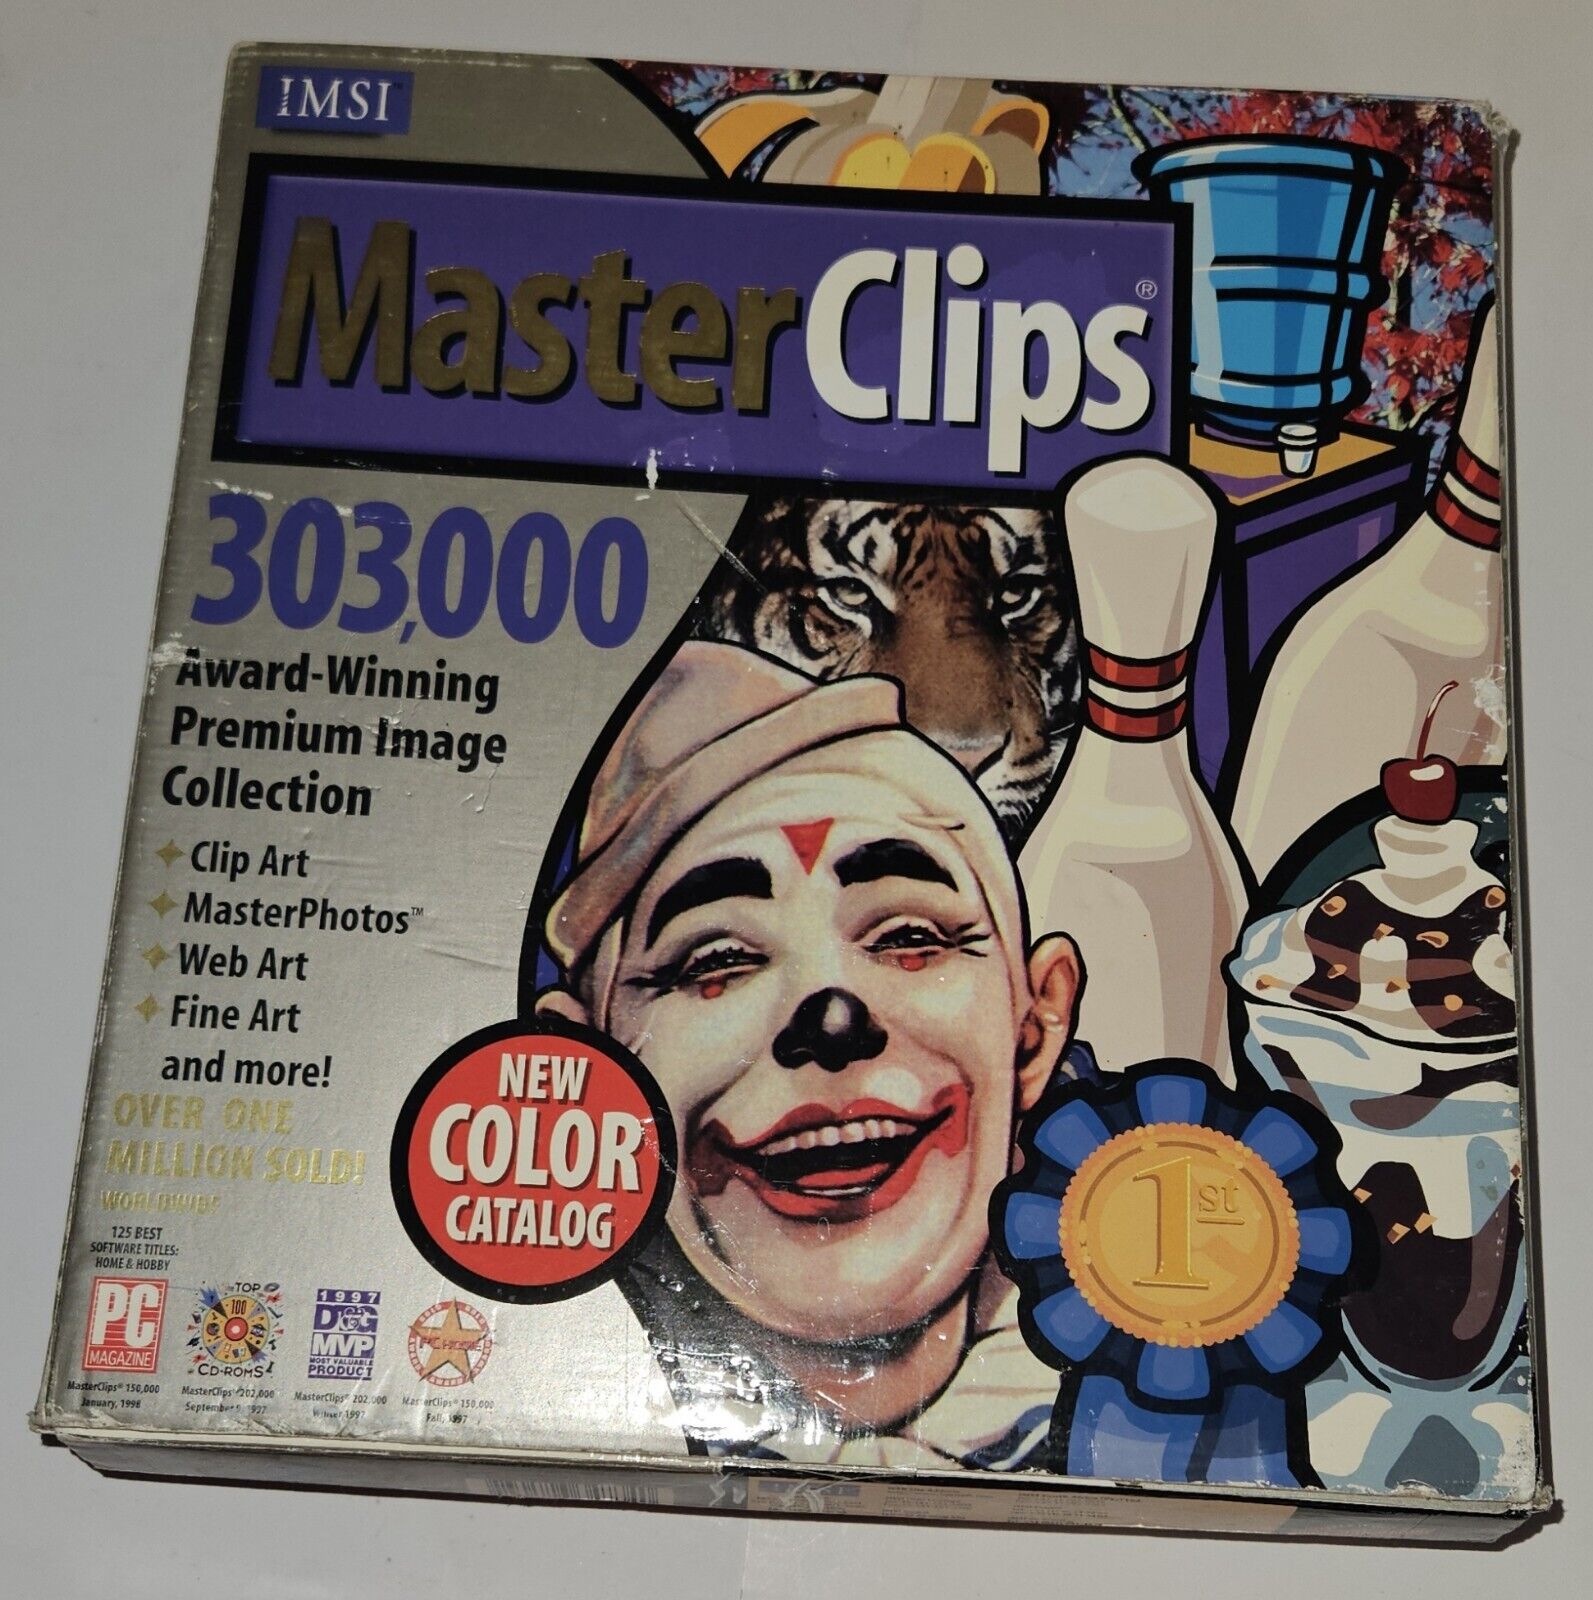 Master Clips Book And 20 CD set, 303,000 Design Guide Image Catalog